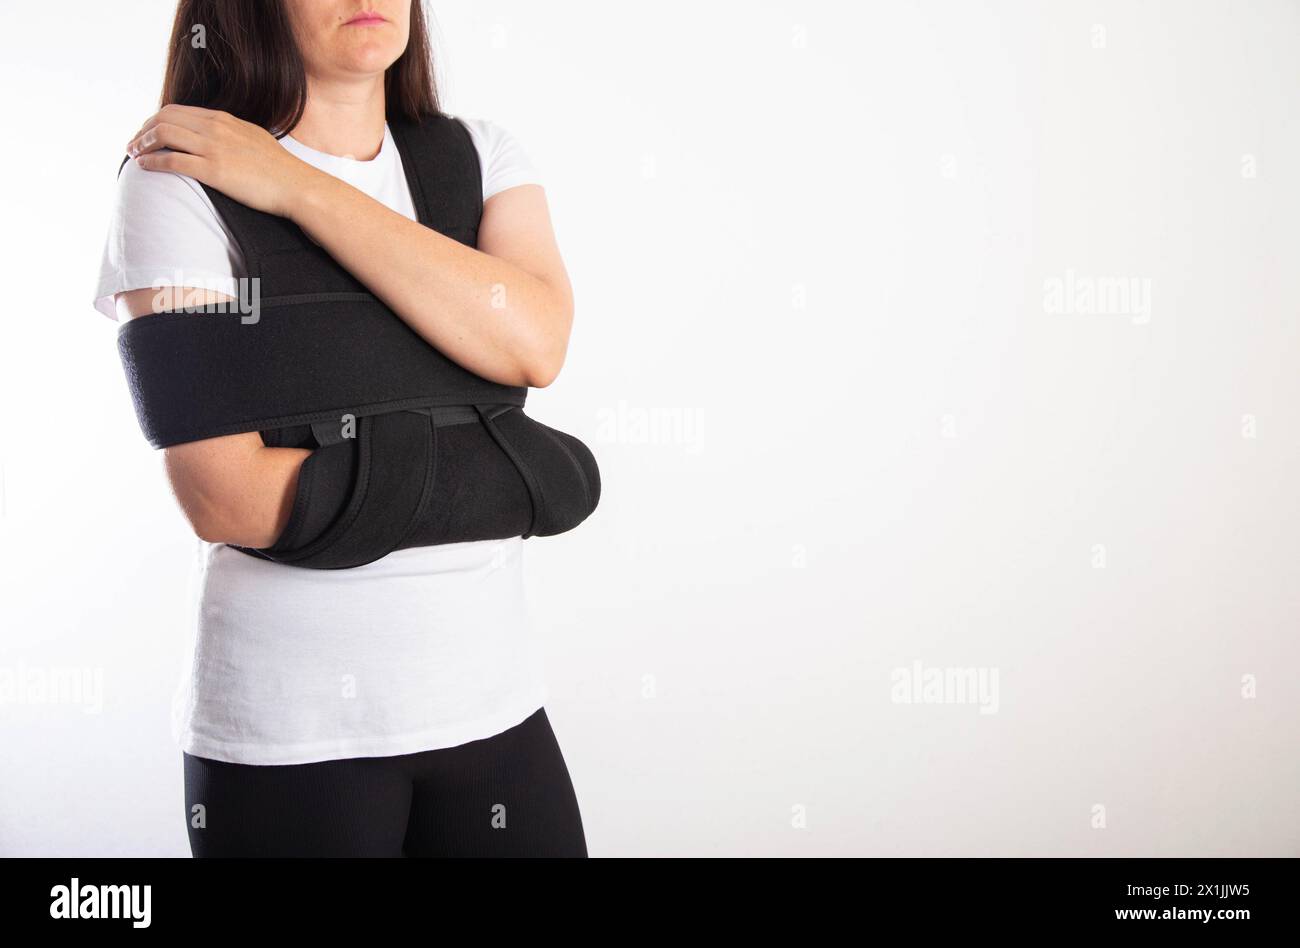 A girl in a black medical brace on the shoulder joint for rehabilitation after a fracture of the humerus and dislocation. Post-traumatic immobilizatio Stock Photo